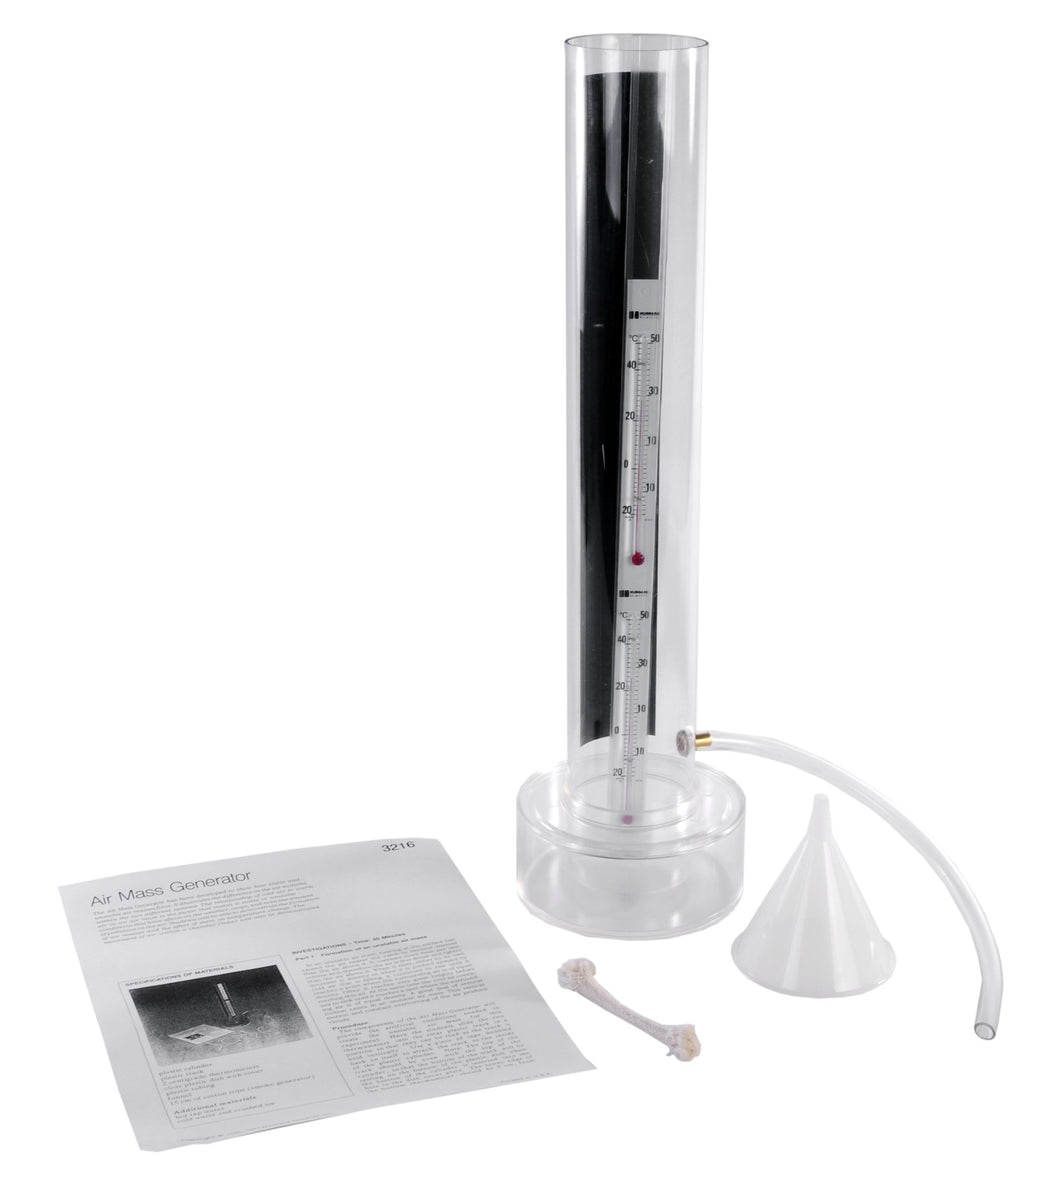 Air mass generator kit for study of air mass formation and relationship of temperature to air mass | Integral thermometers set in tube at different heights for measuring temperature variation with altitude | Tube with thermometers, convection chamber, tubing, funnel, and smoke generator for demonstration | Teacher's guide for instructional use | Suitable for grades 6 to 12 and ages 11 to 18